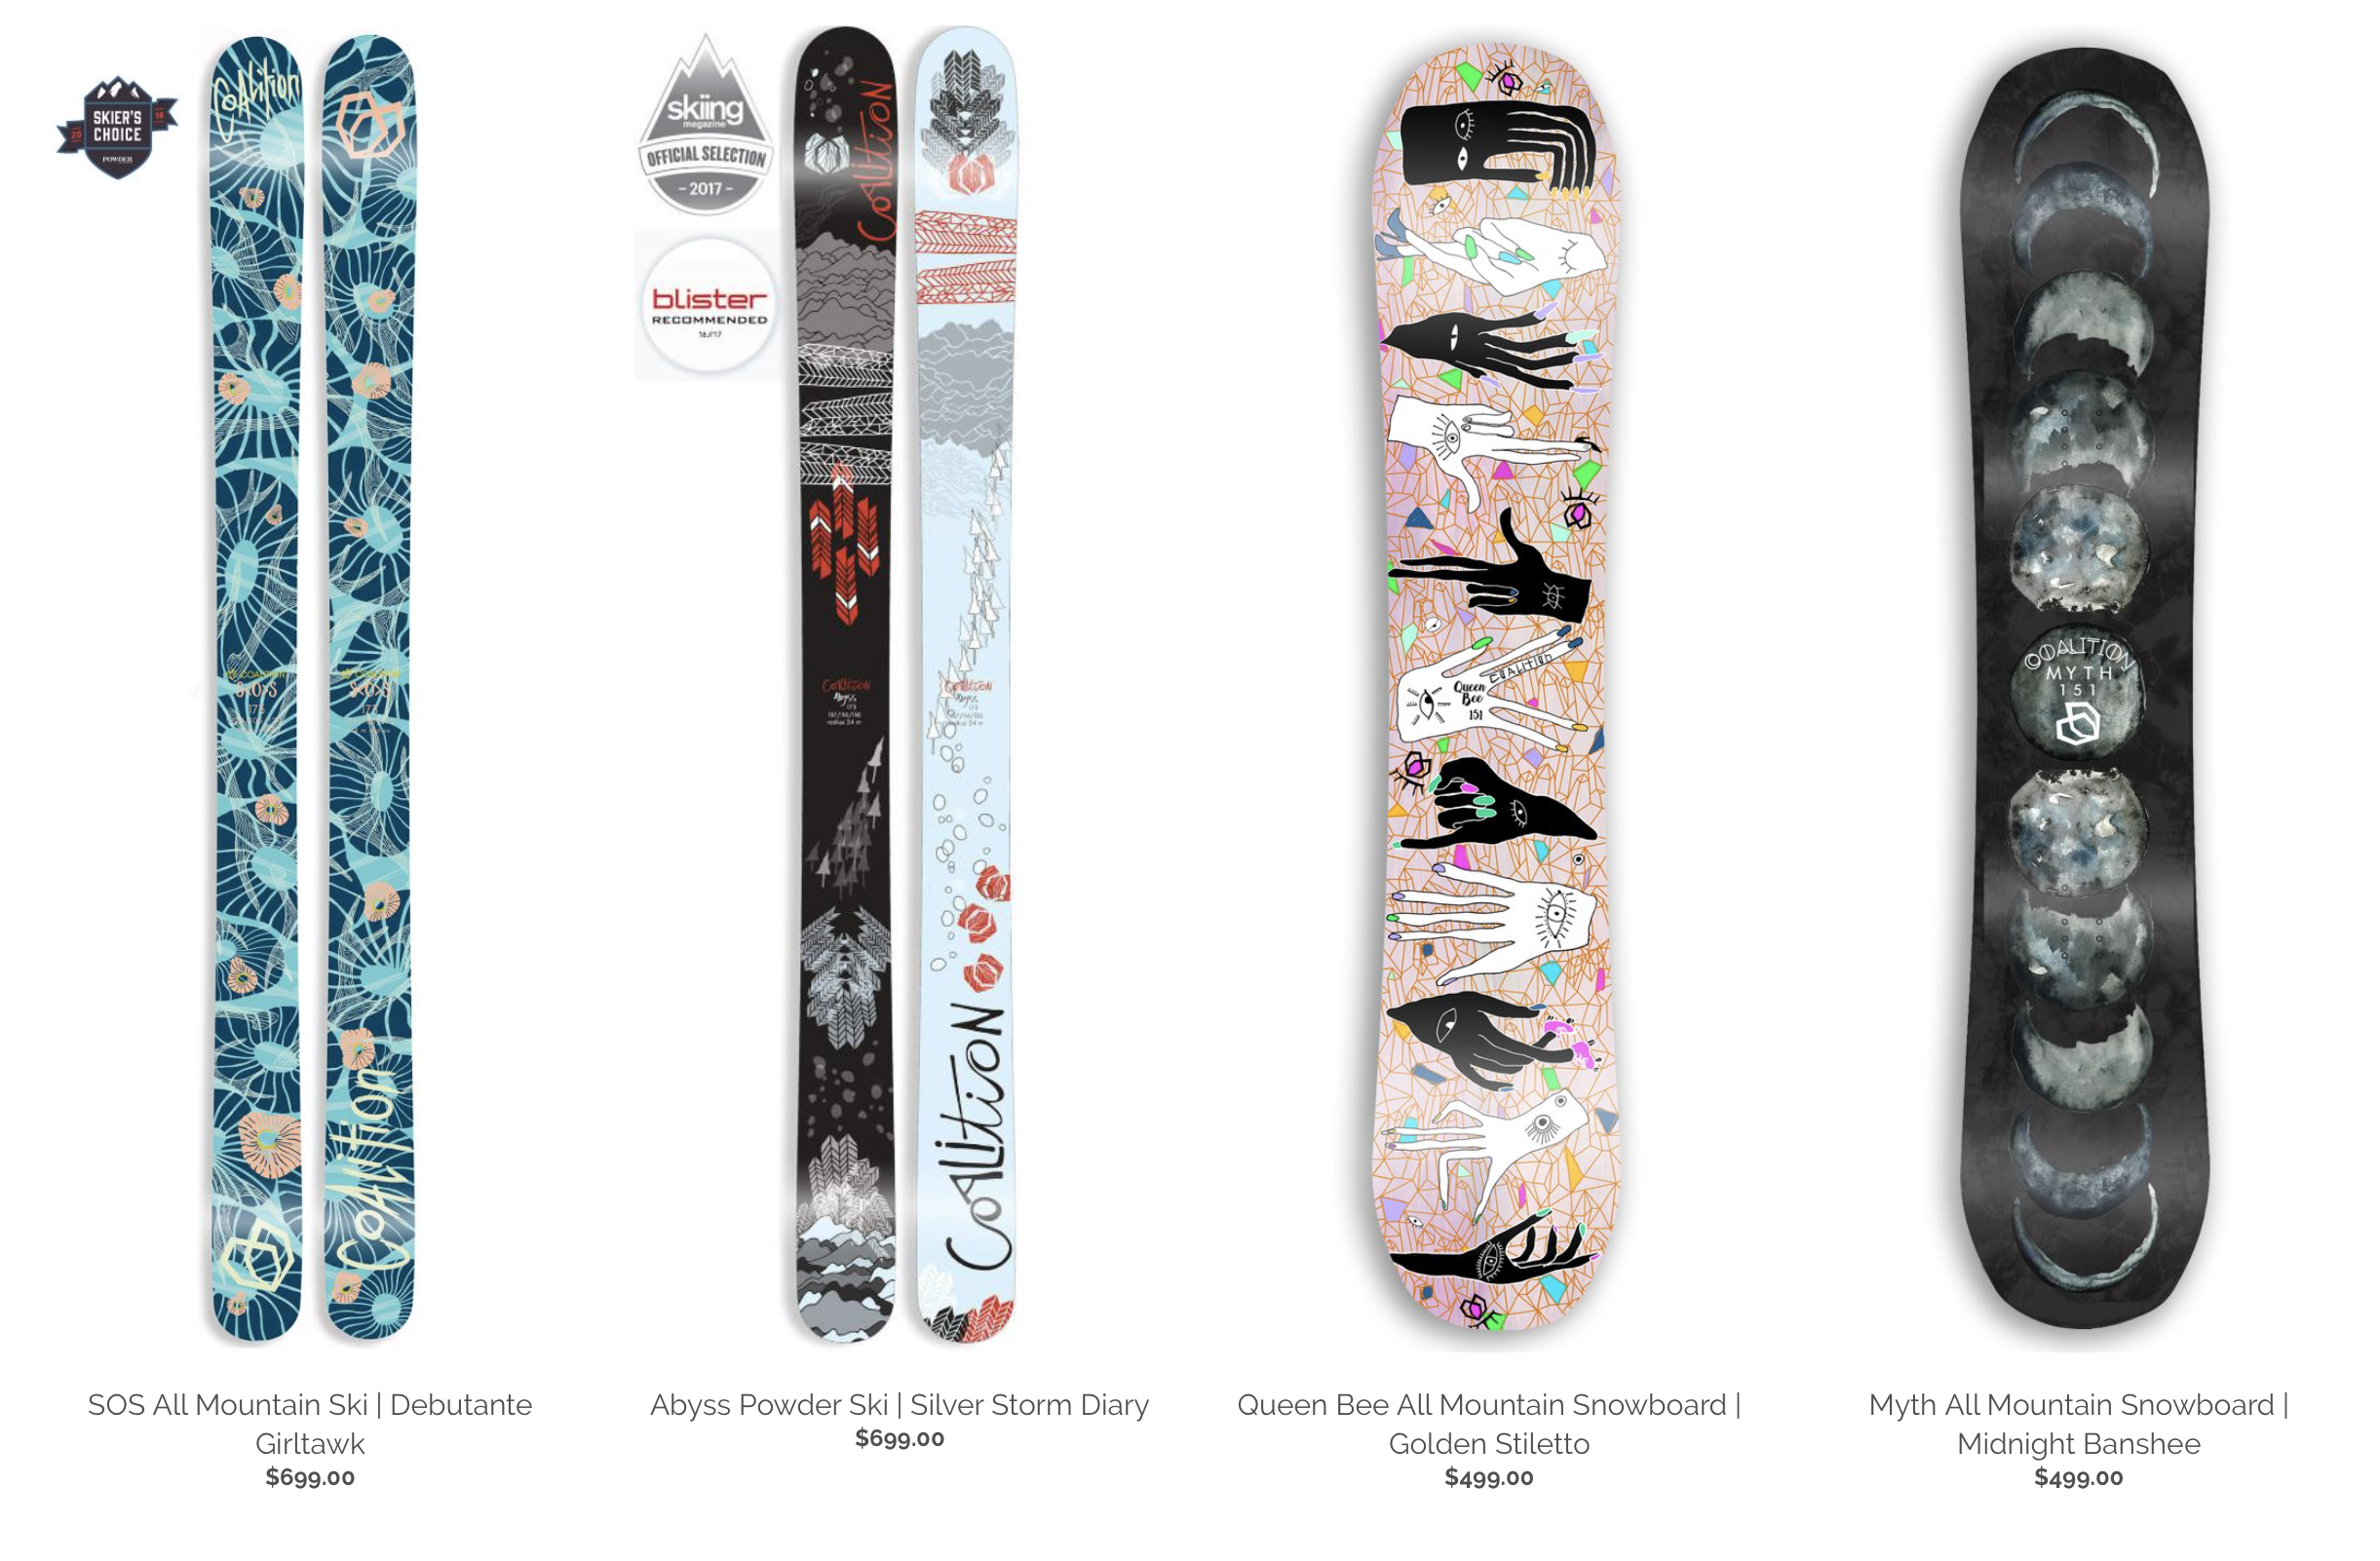 Coalition Snow Skis and snowboards